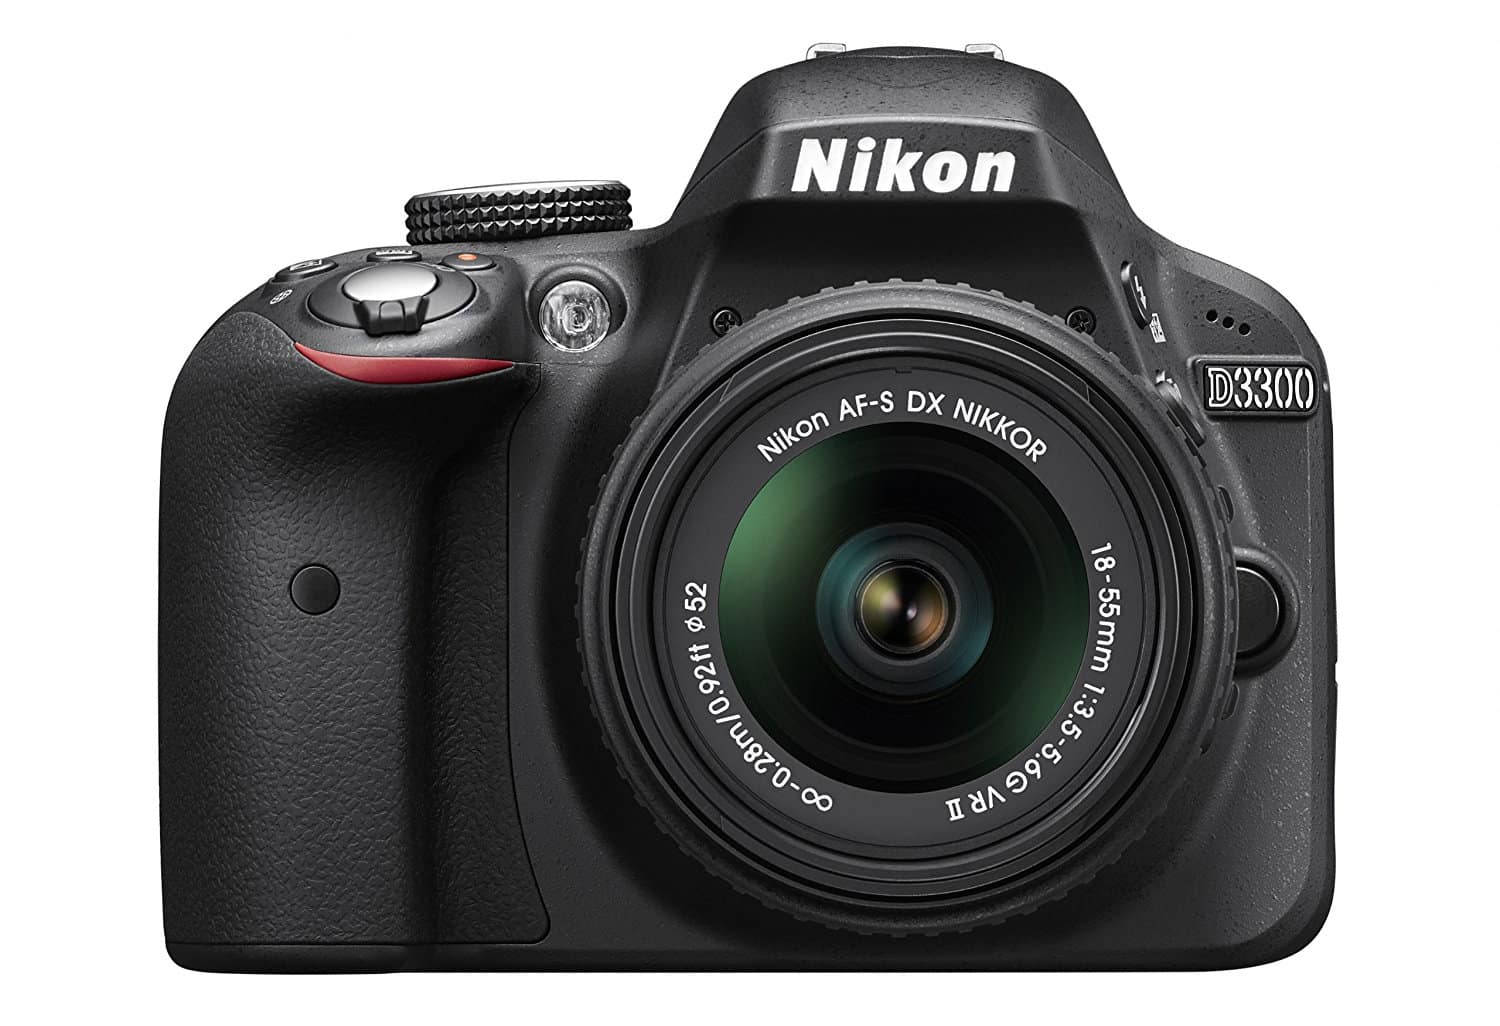 A front view of the Nikon D3300 Camera Kit